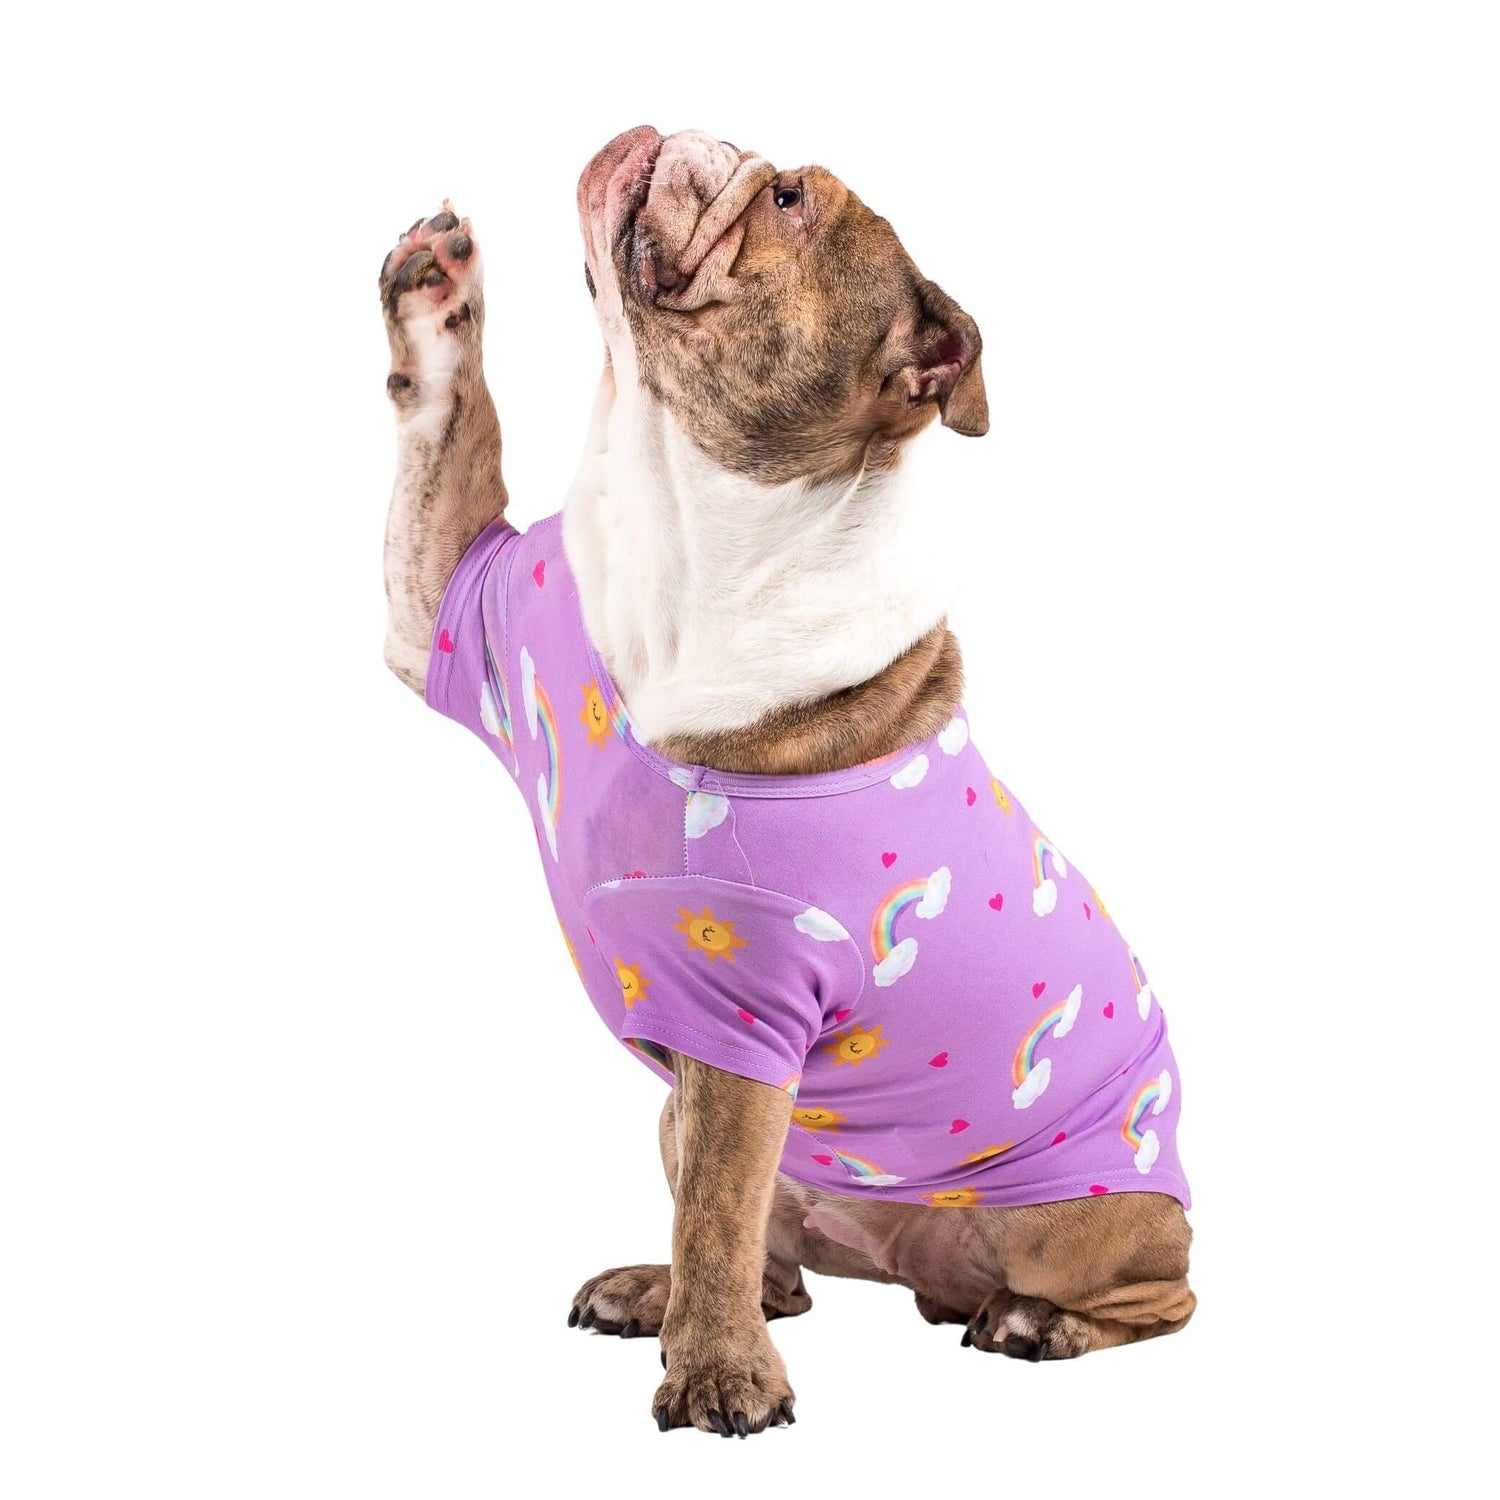 A English Bulldog with a paw in the air wearing Vibrant Hound's Chasing Rainbow dog pyjama. The dog shirt is purple with rainbows, bright suns, and love hearts printed on it.